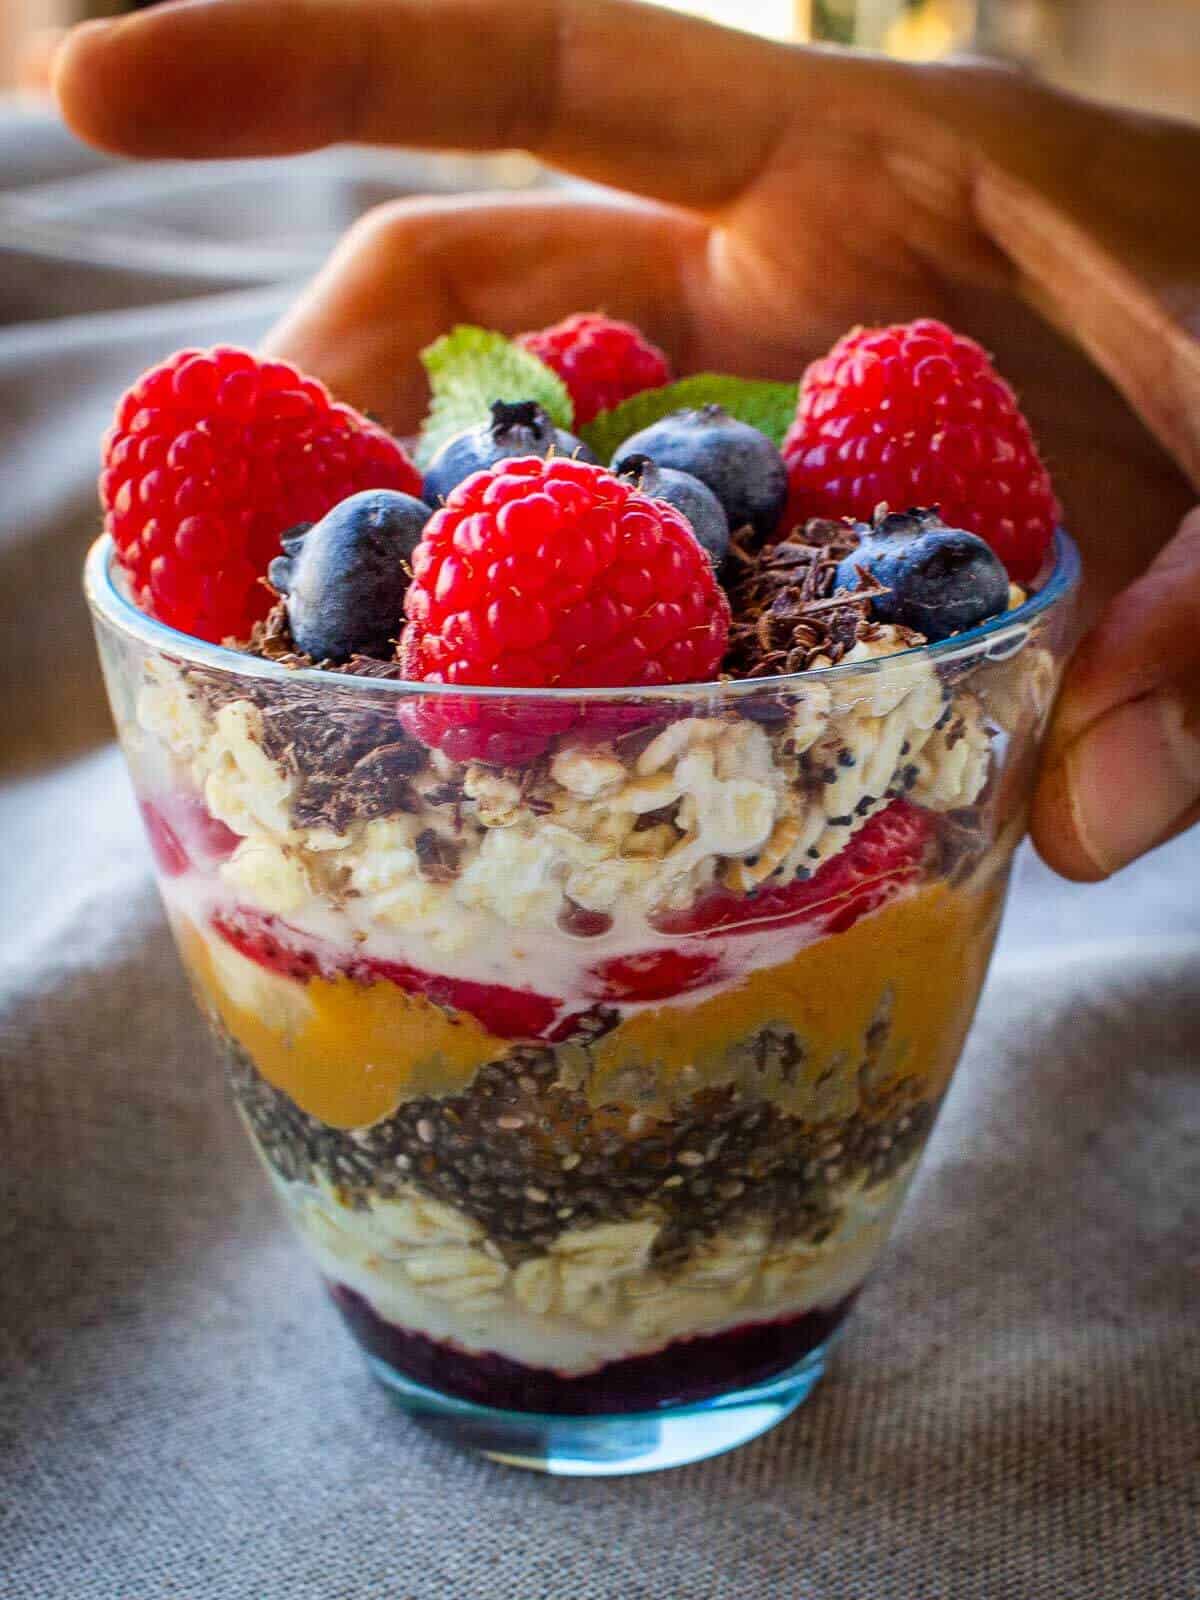 topping Oats and Chia Pudding with fresh blueberries, raspberries, and cocoa nibs.